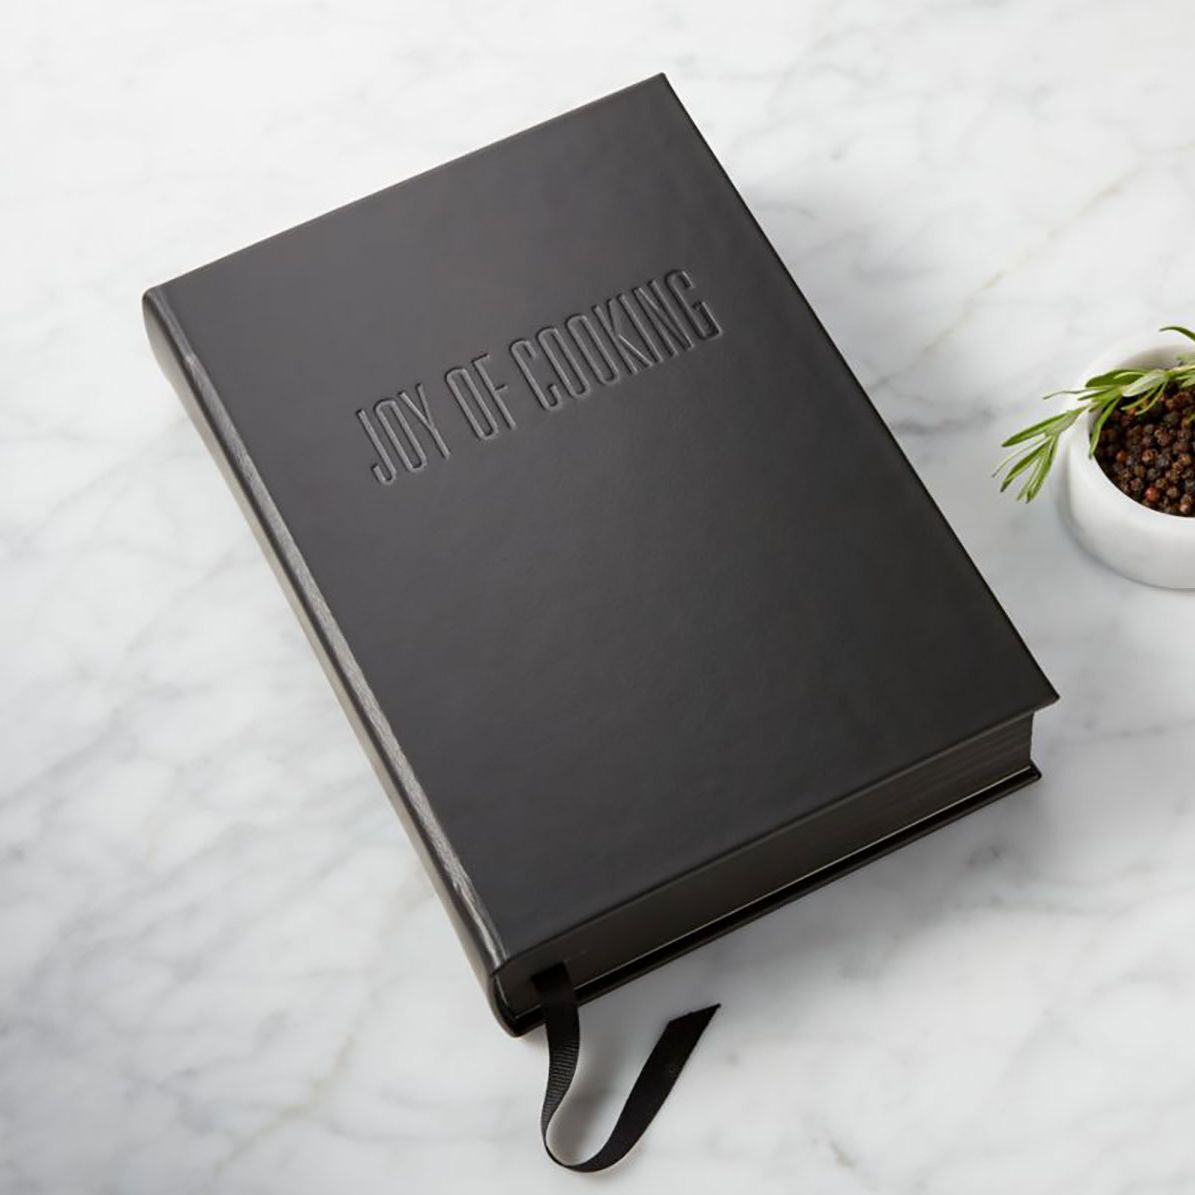 Joy Of Cooking Debuts Black Leather, Leather Bound Recipe Book